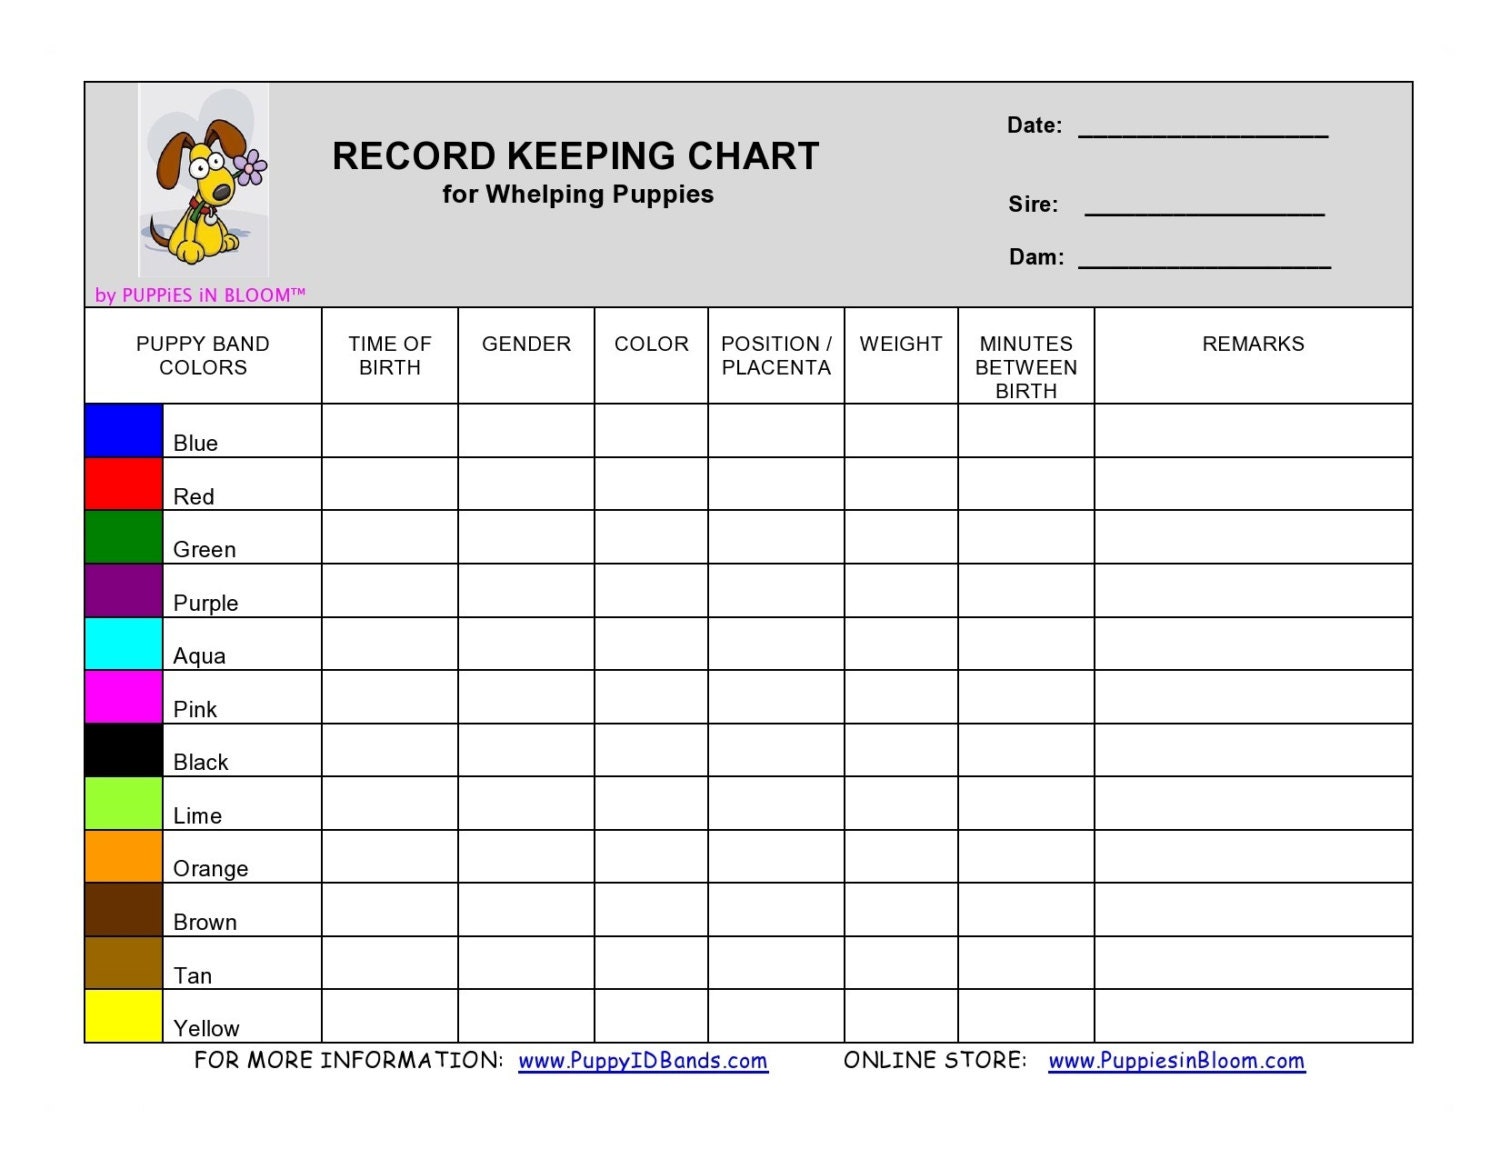 Record Keeping Charts for Breeders _Whelping by PuppiesInBloom